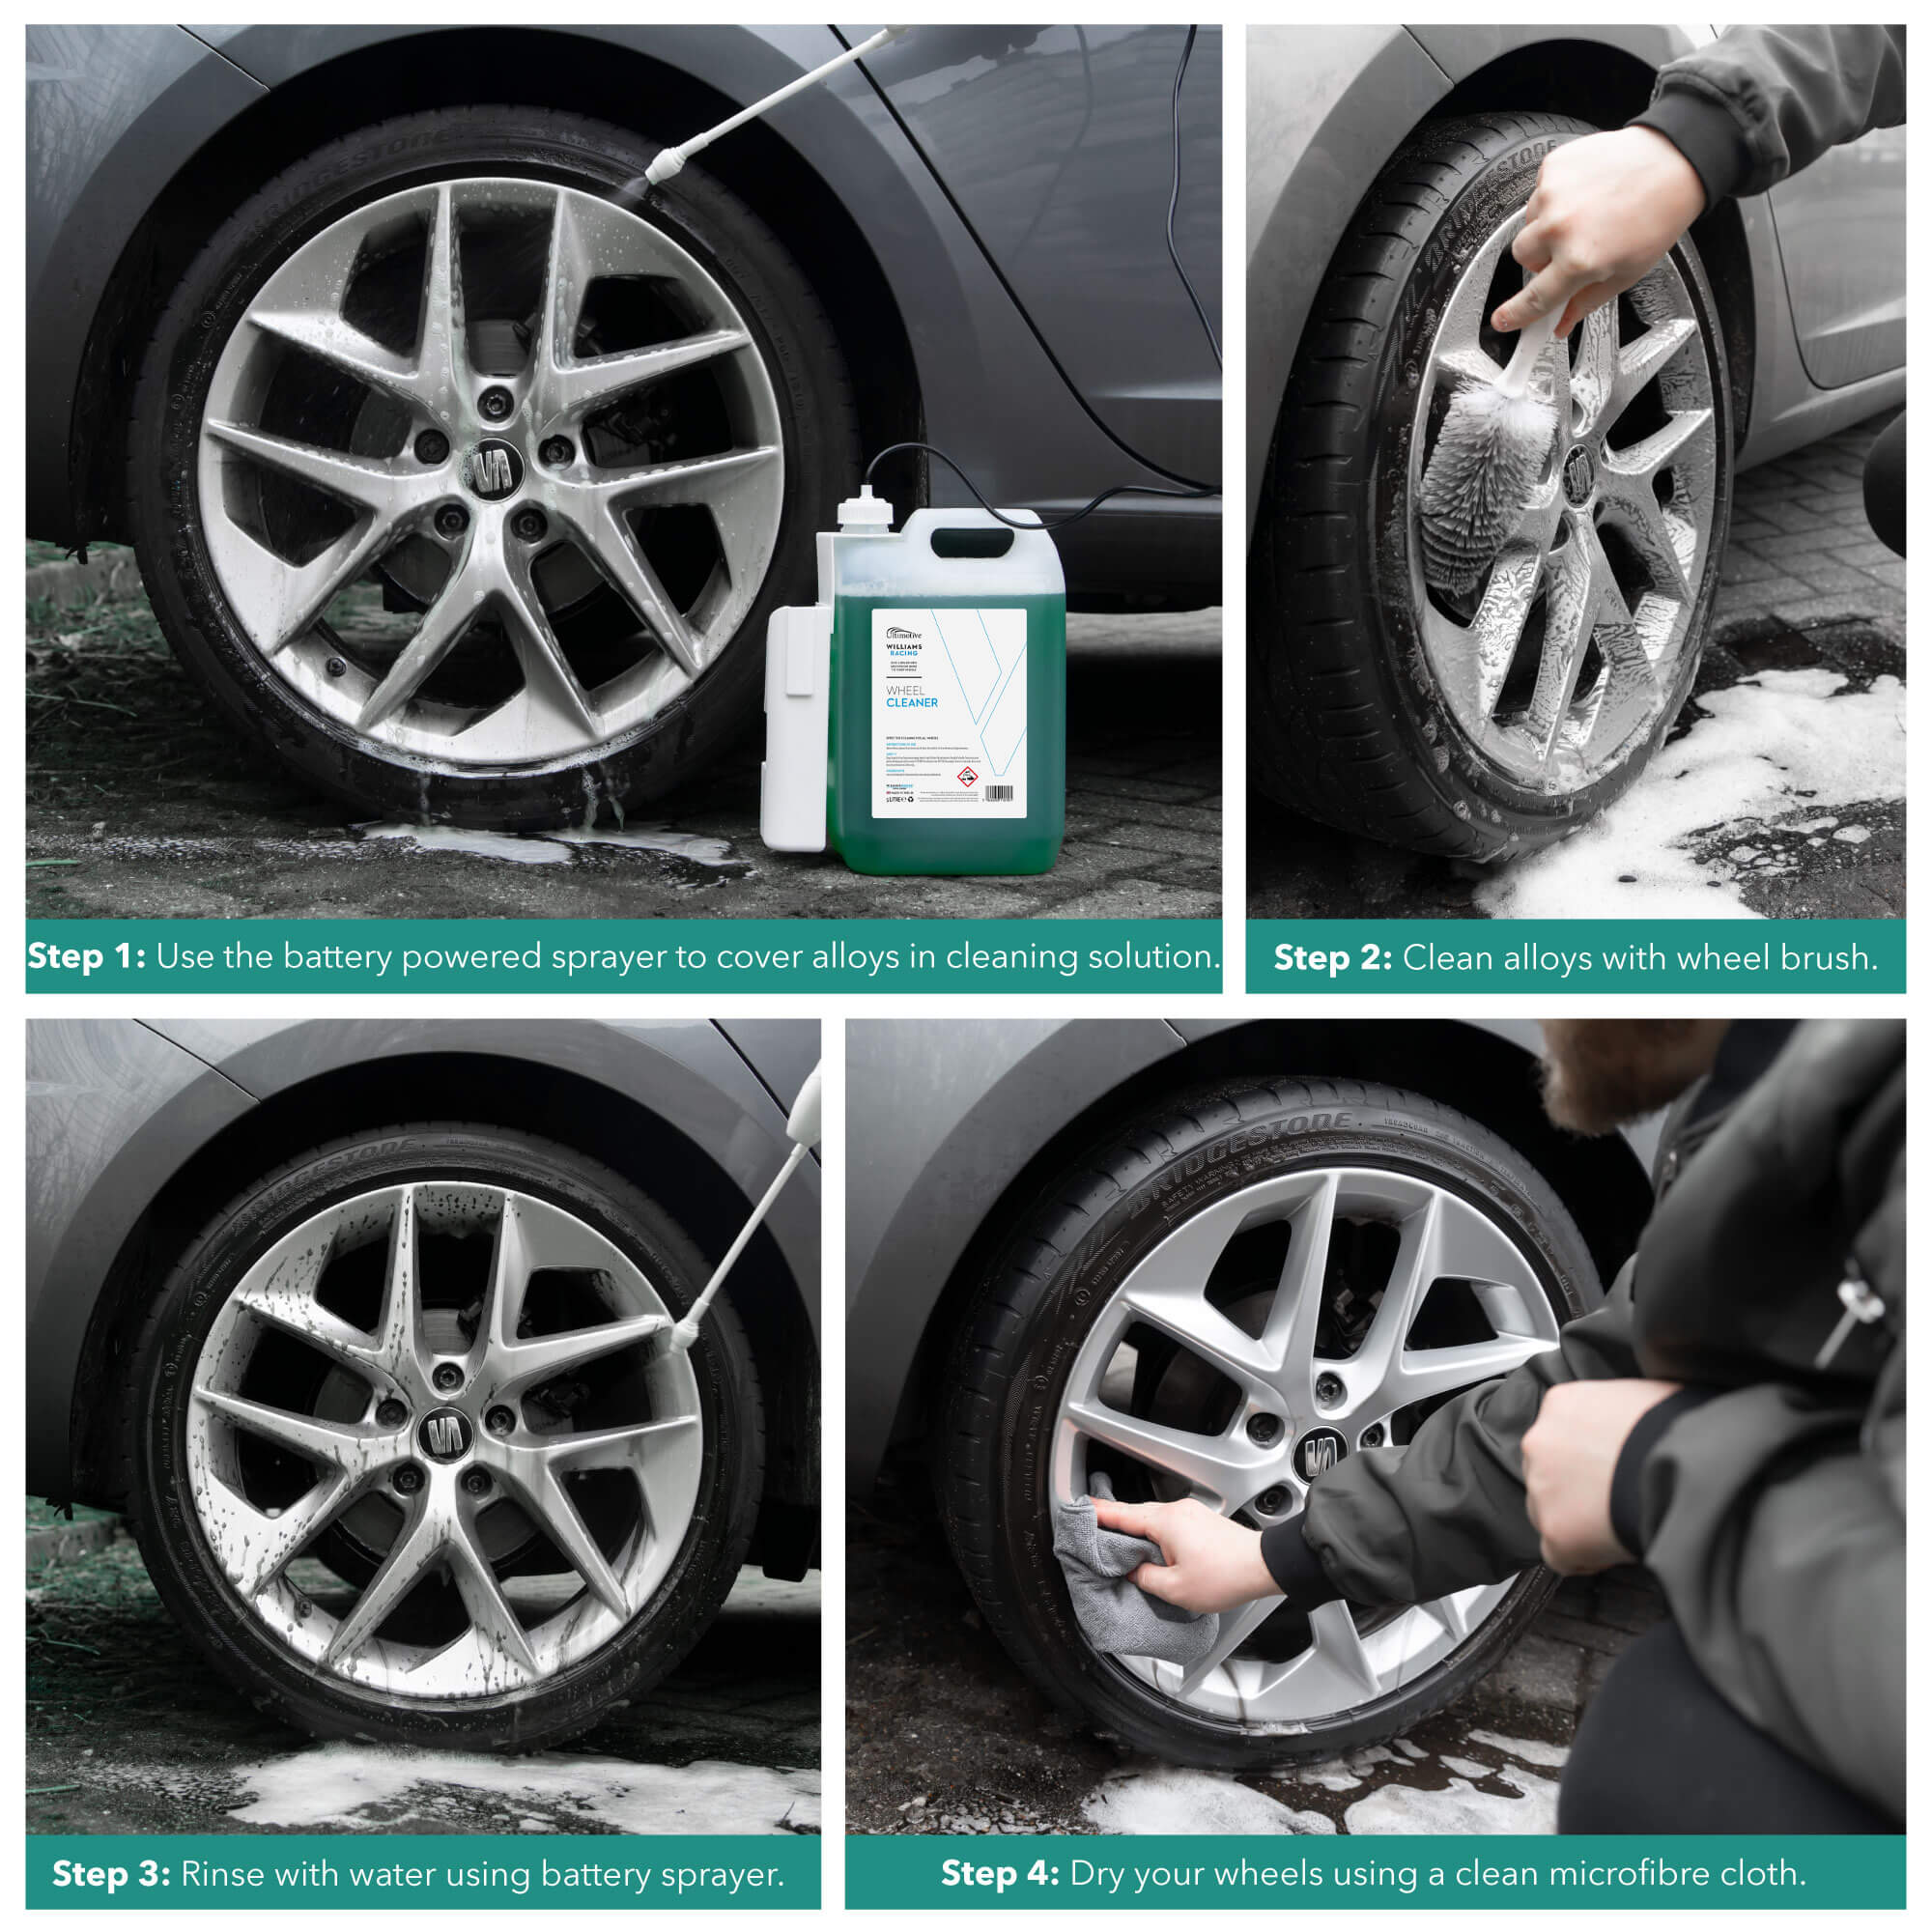 How to use Williams Wheel Cleaner